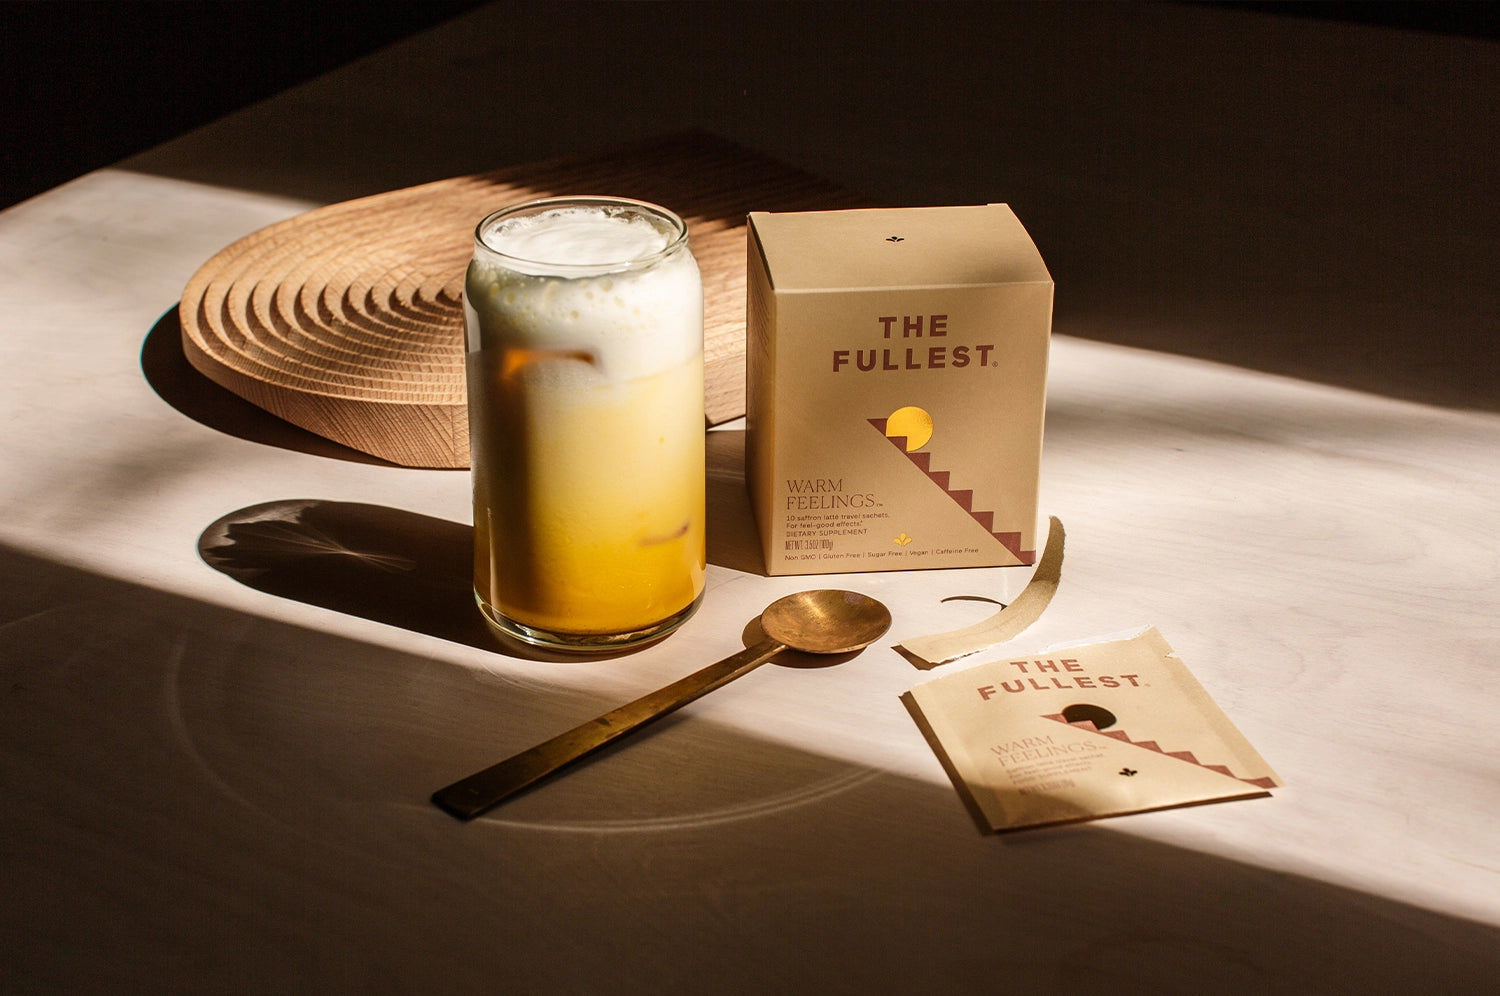 THE FULLEST Warm Feelings saffron latte drink in glass cup sitting next to brass spoon and warm feelings sachet box.